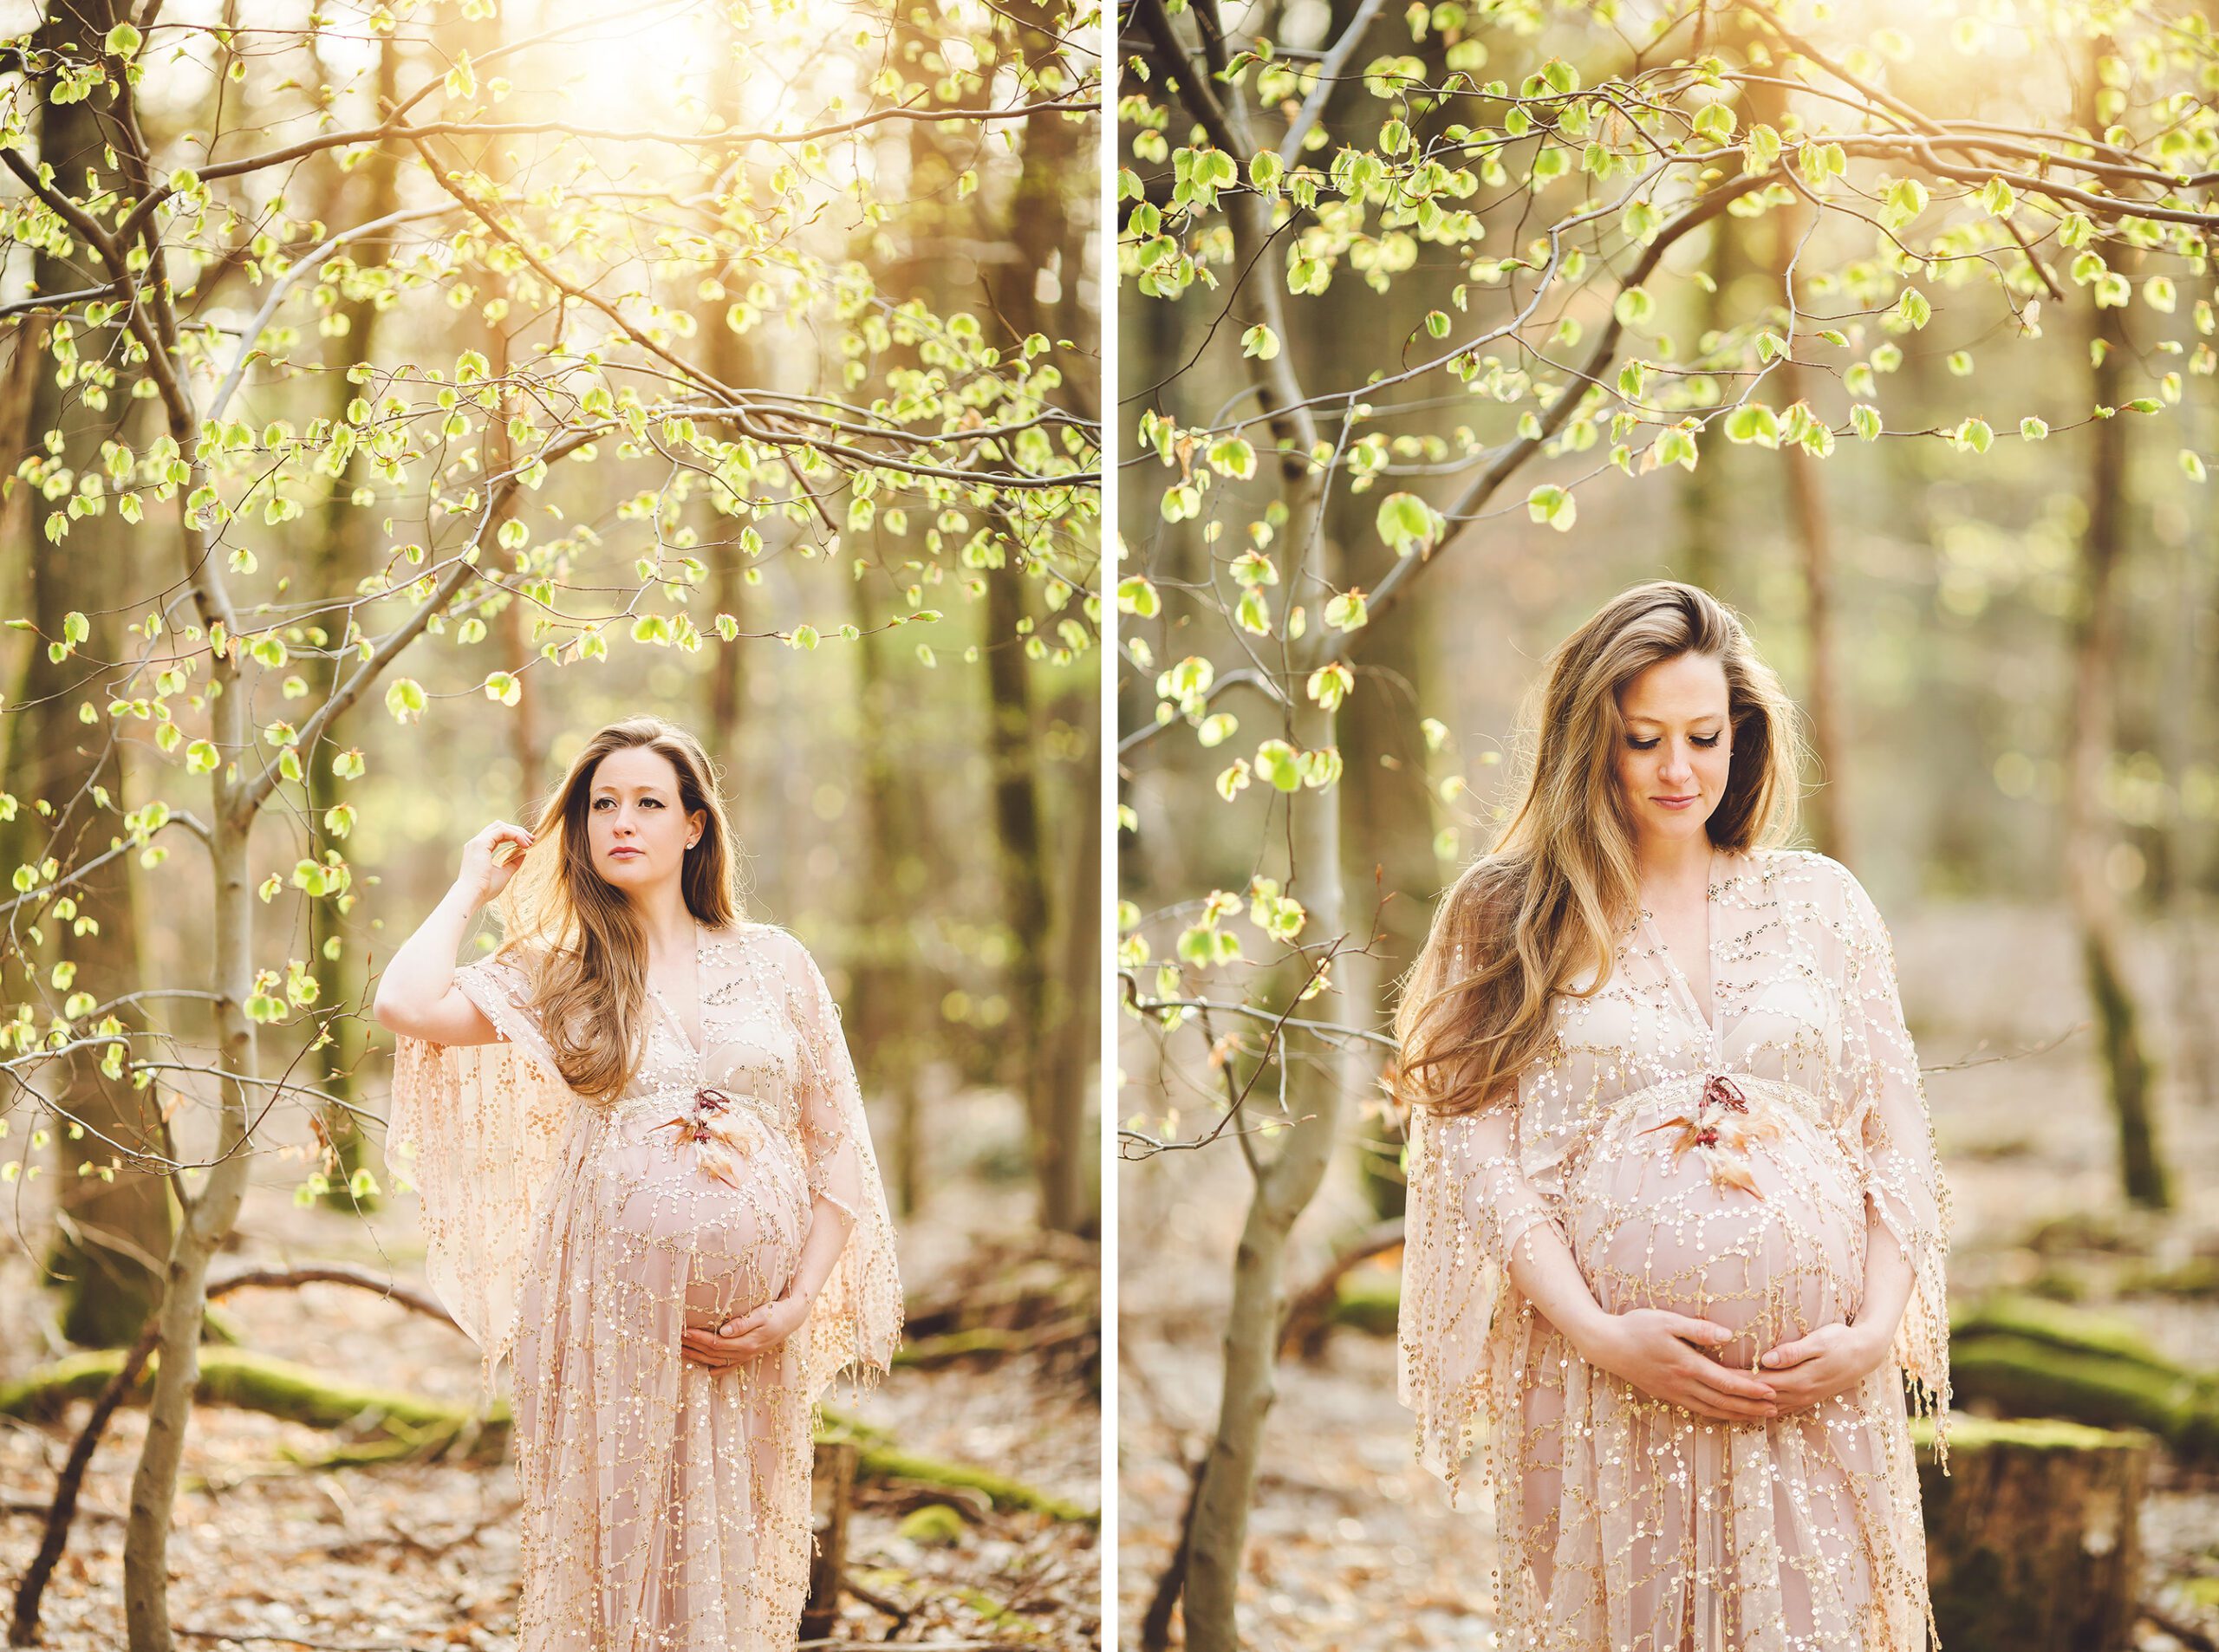 A breathtaking spring maternity session for Tabitha